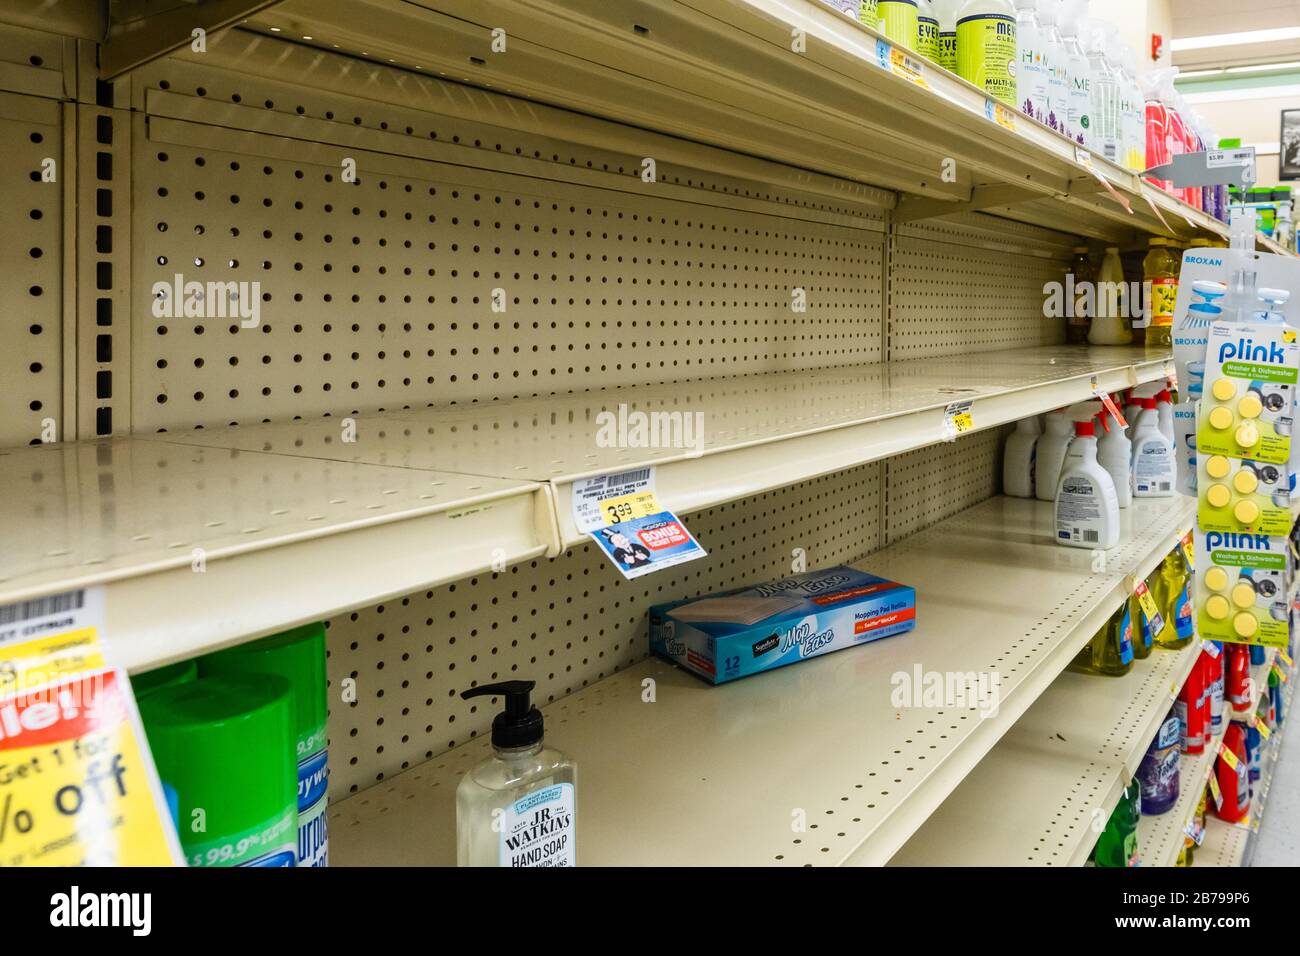 Nearly empty shelves in a supermarket grocery store in the tissue box aisle as coronavirus causes fear and panic Stock Photo